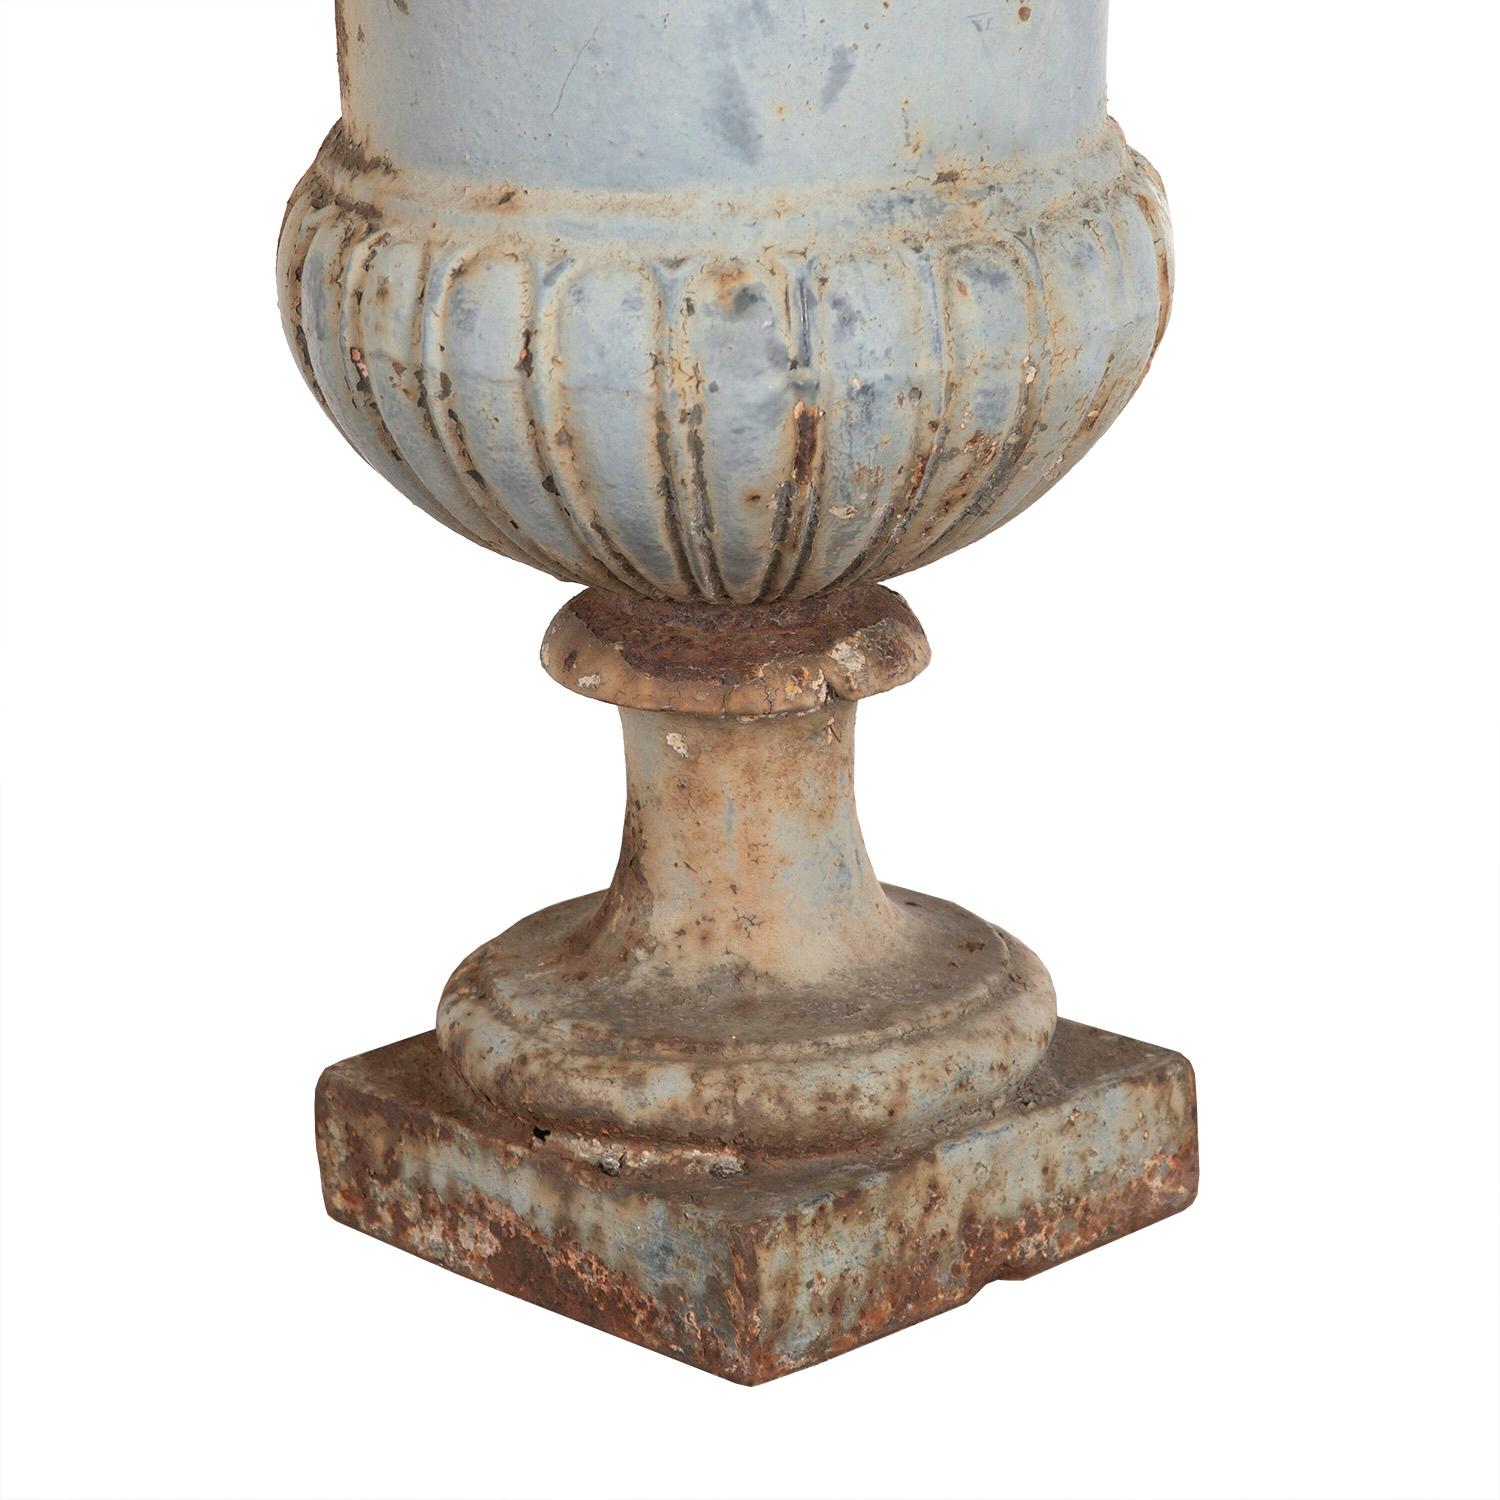 Pair of 19th century French Medici urns of good shape. These urns have a great weathered patina.